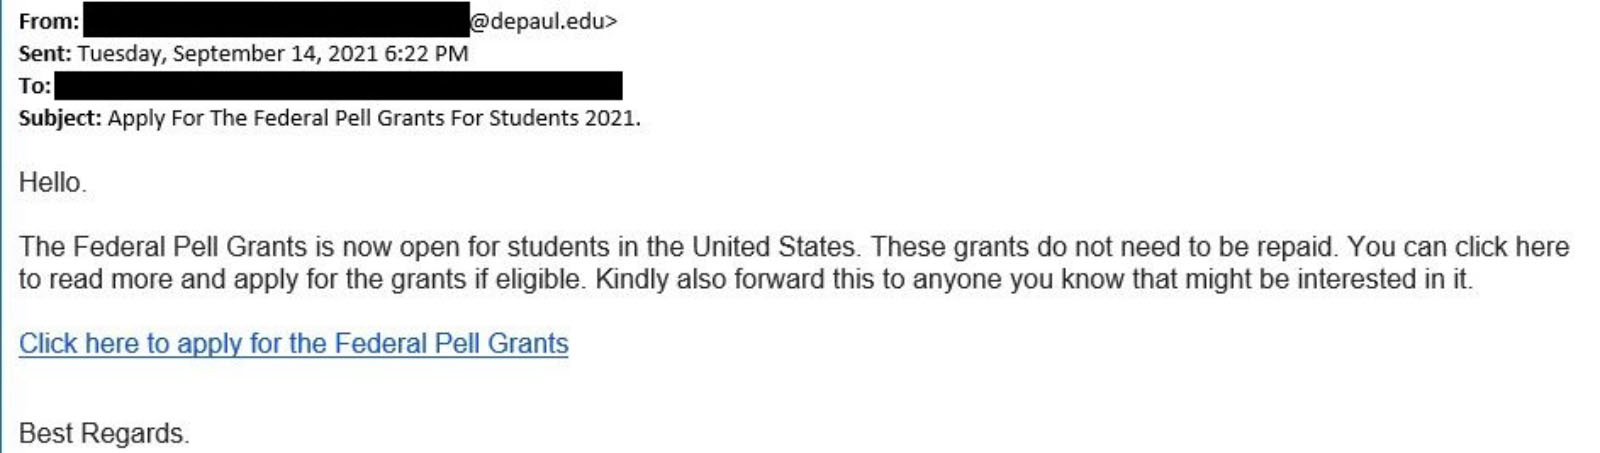 A screenshot of a malicious email. The email attempts to trick victims into apply for a Pell grant at a fake website.